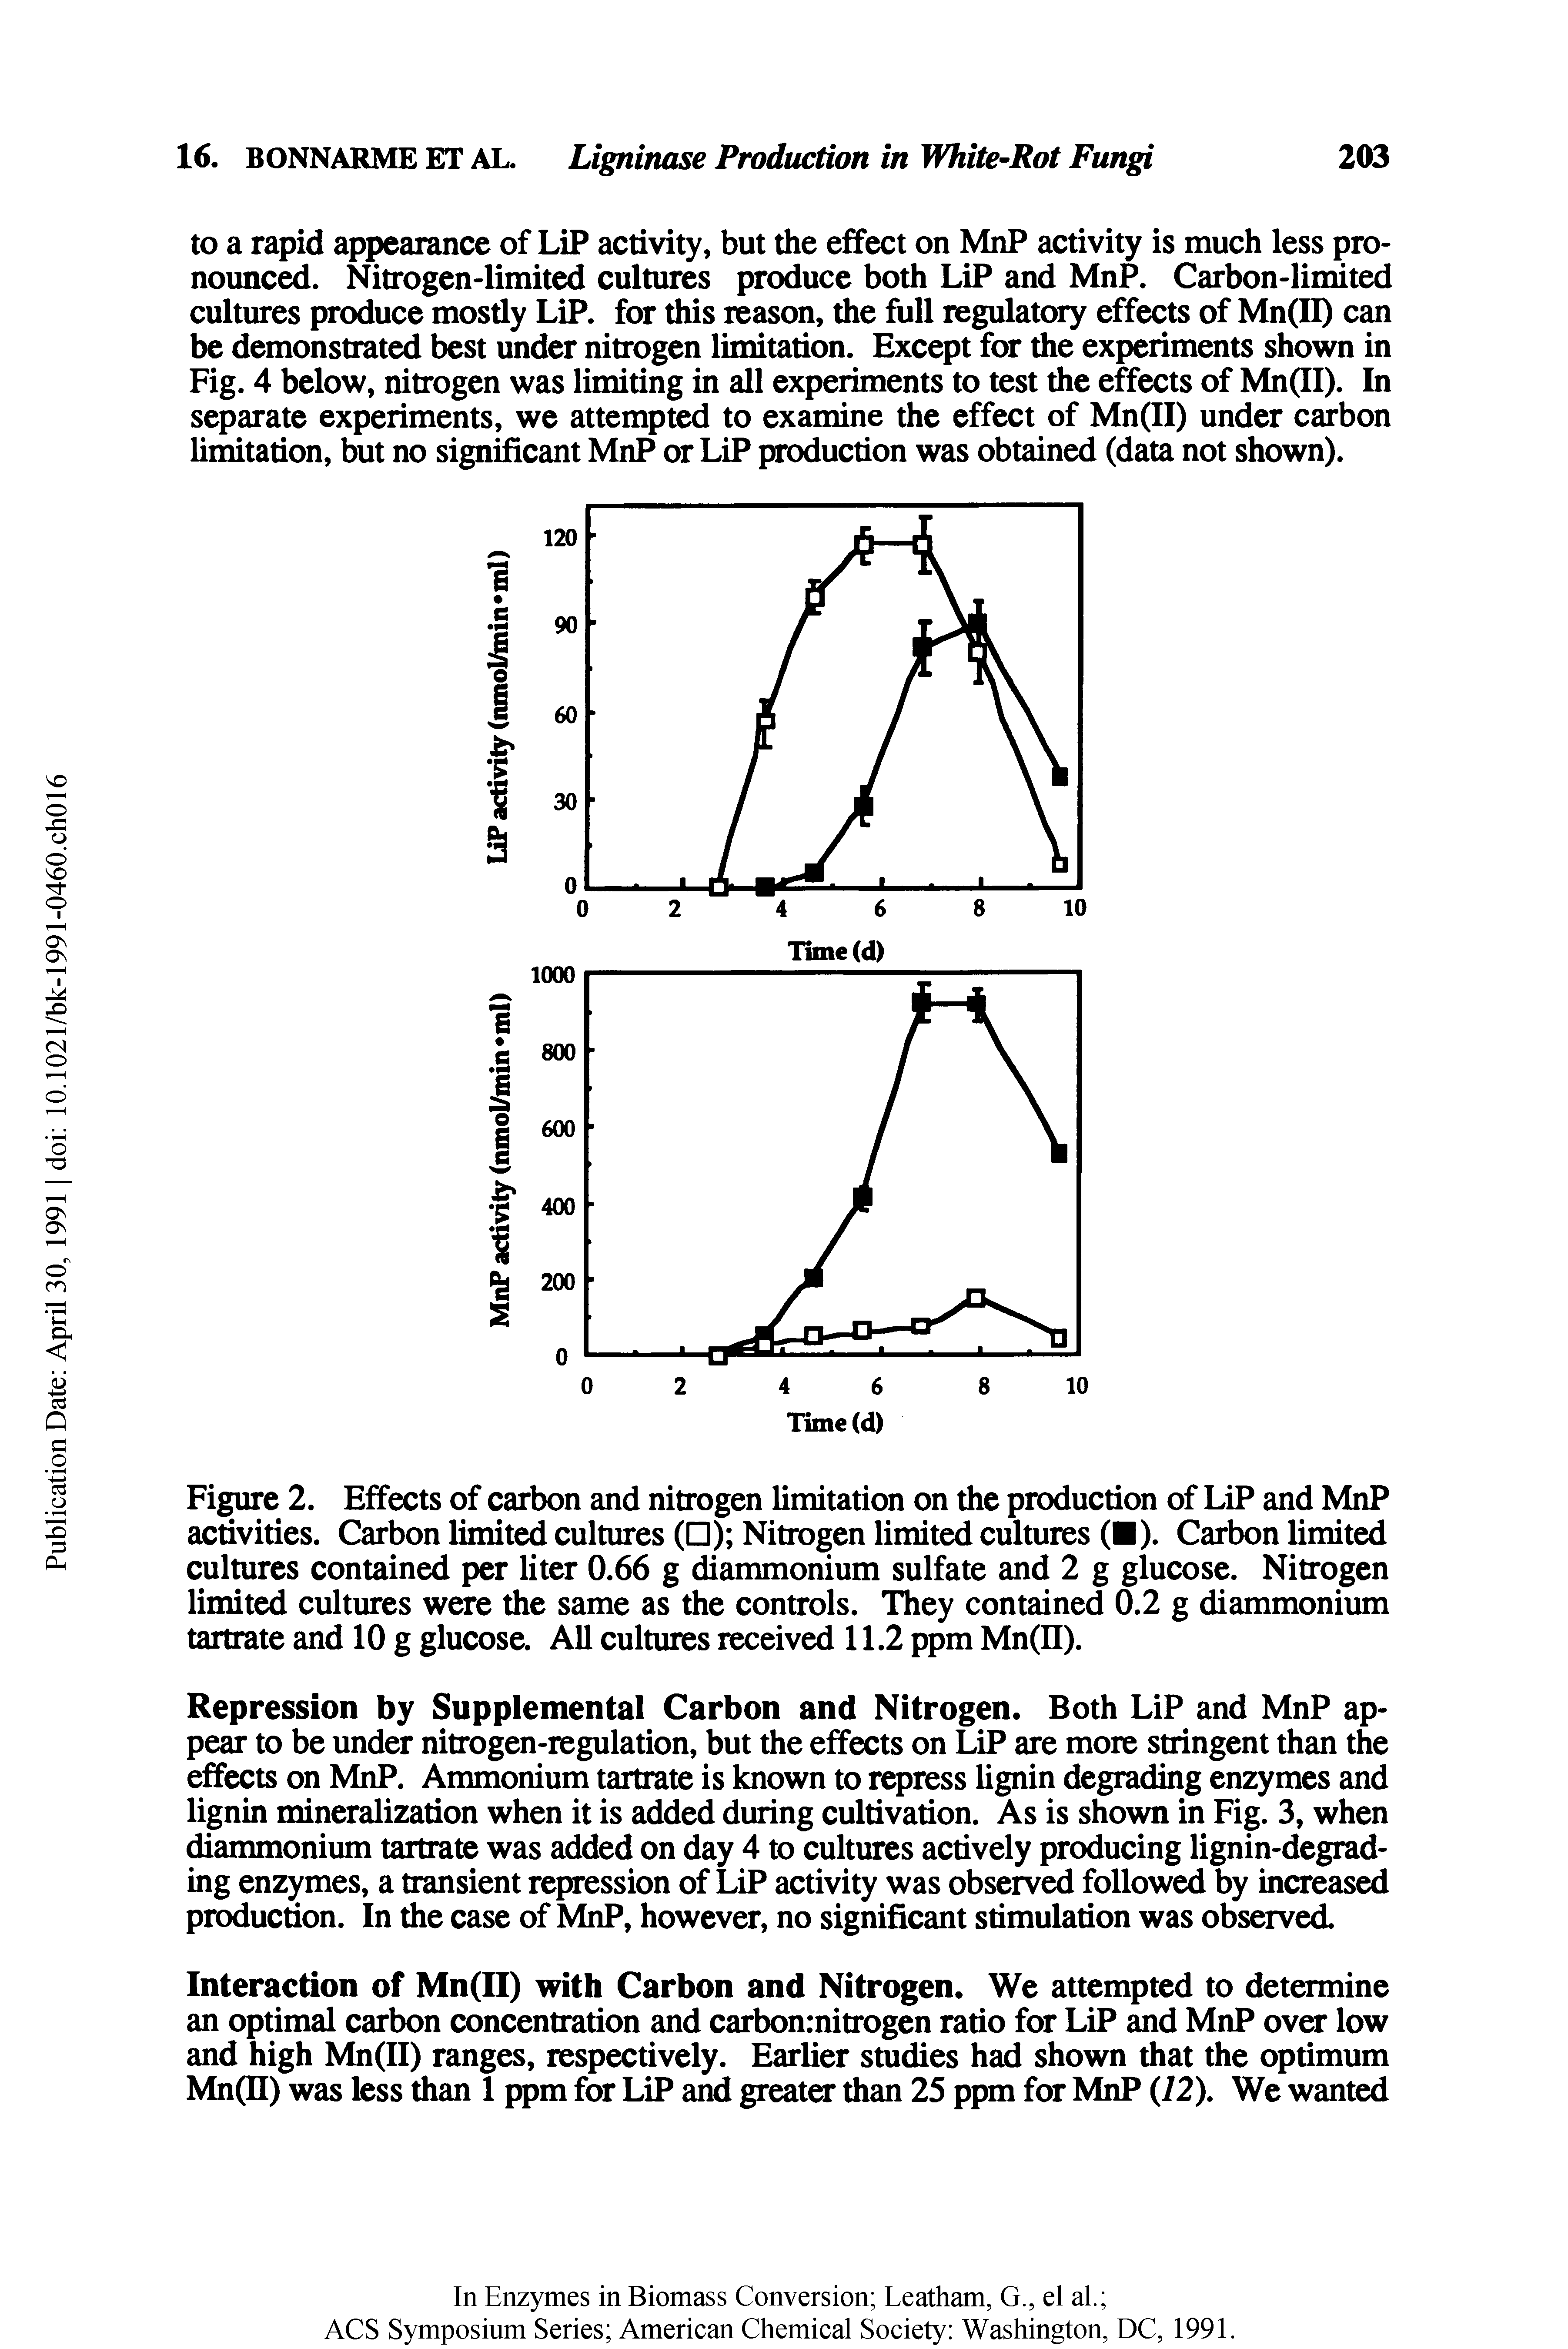 Figure 2. Effects of carbon and nitrogen limitation on the production of LiP and MnP activities. Carbon limited cultures ( ) Nitrogen limited cultures ( ). Carbon limited cultures contained per liter 0.66 g diammonium sulfate and 2 g glucose. Nitrogen limited cultures were the same as the controls. They contained 0.2 g diammonium tartrate and 10 g glucose. All cultures received 11.2 ppm Mn(II).